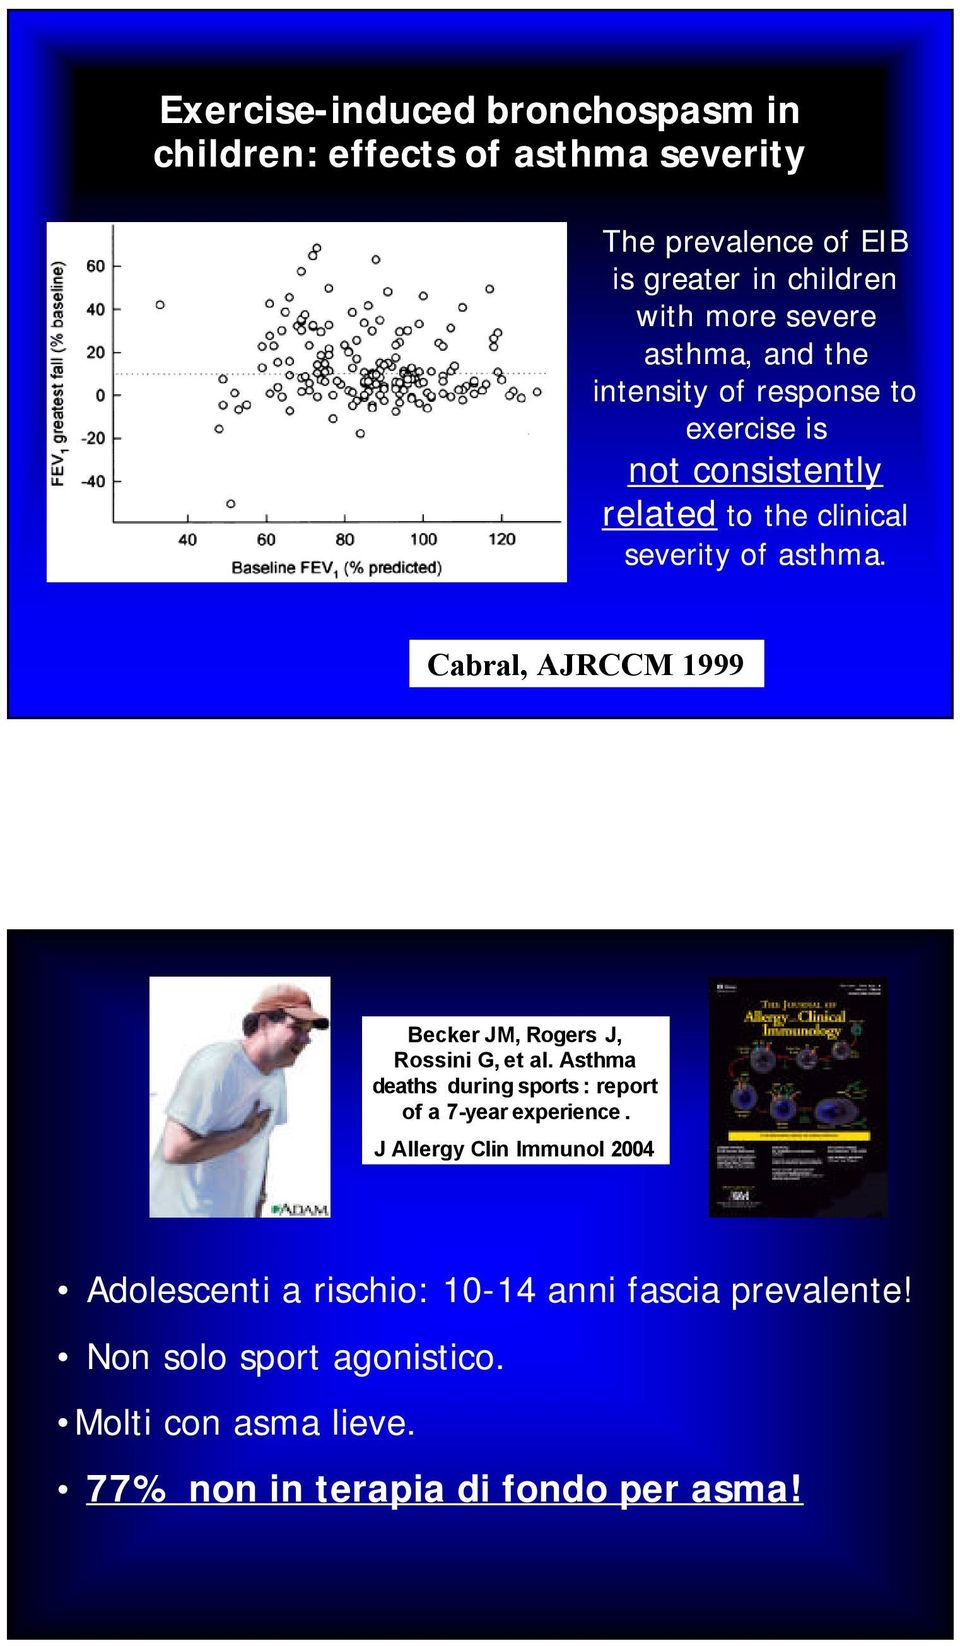 Cabral, AJRCCM 1999 Becker JM, Rogers J, Rossini G, et al. Asthma deaths during sports : report of a 7-year experience.